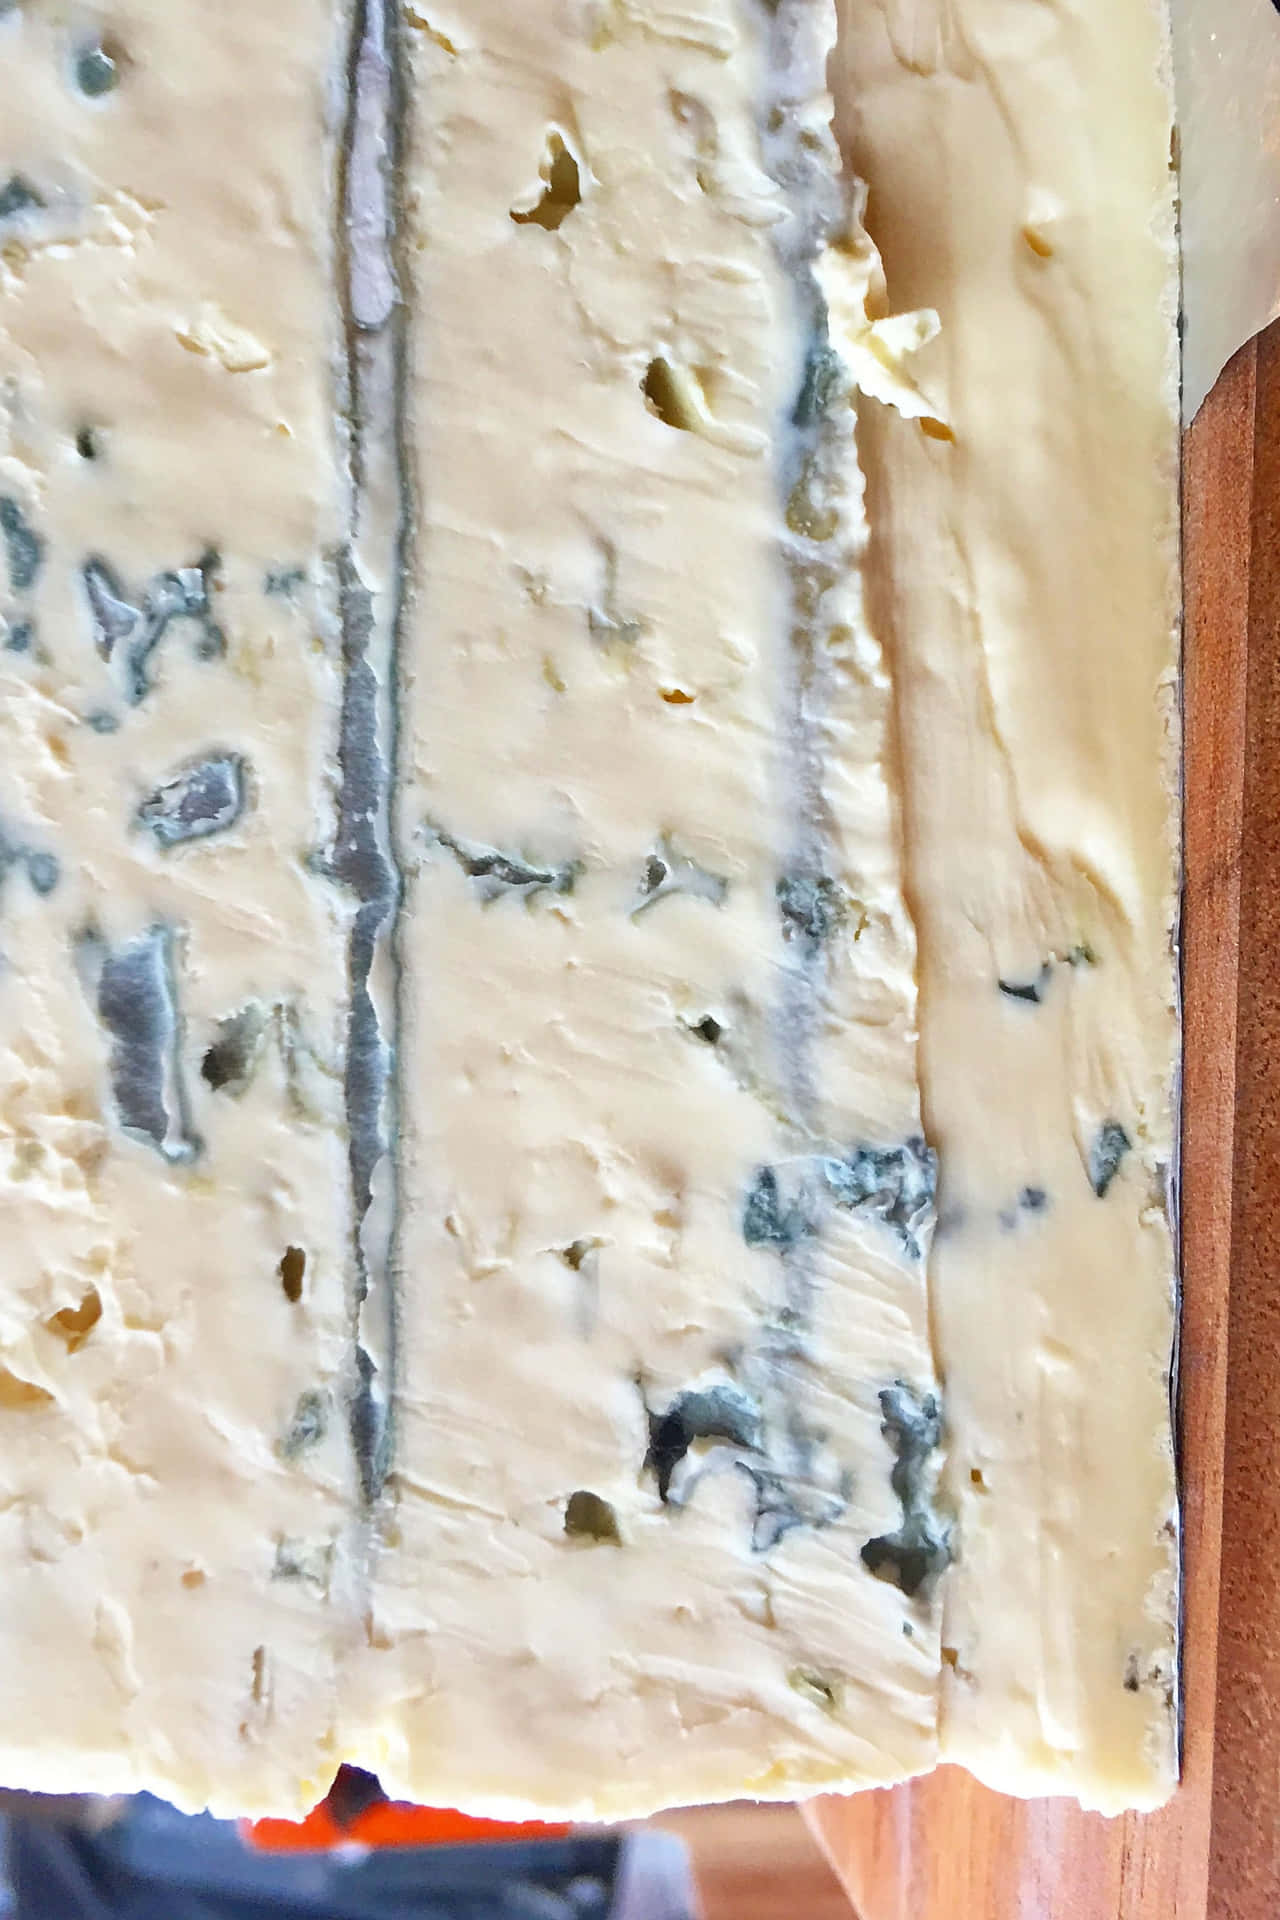 Creamy and nutty, a great addition to any meal Wallpaper